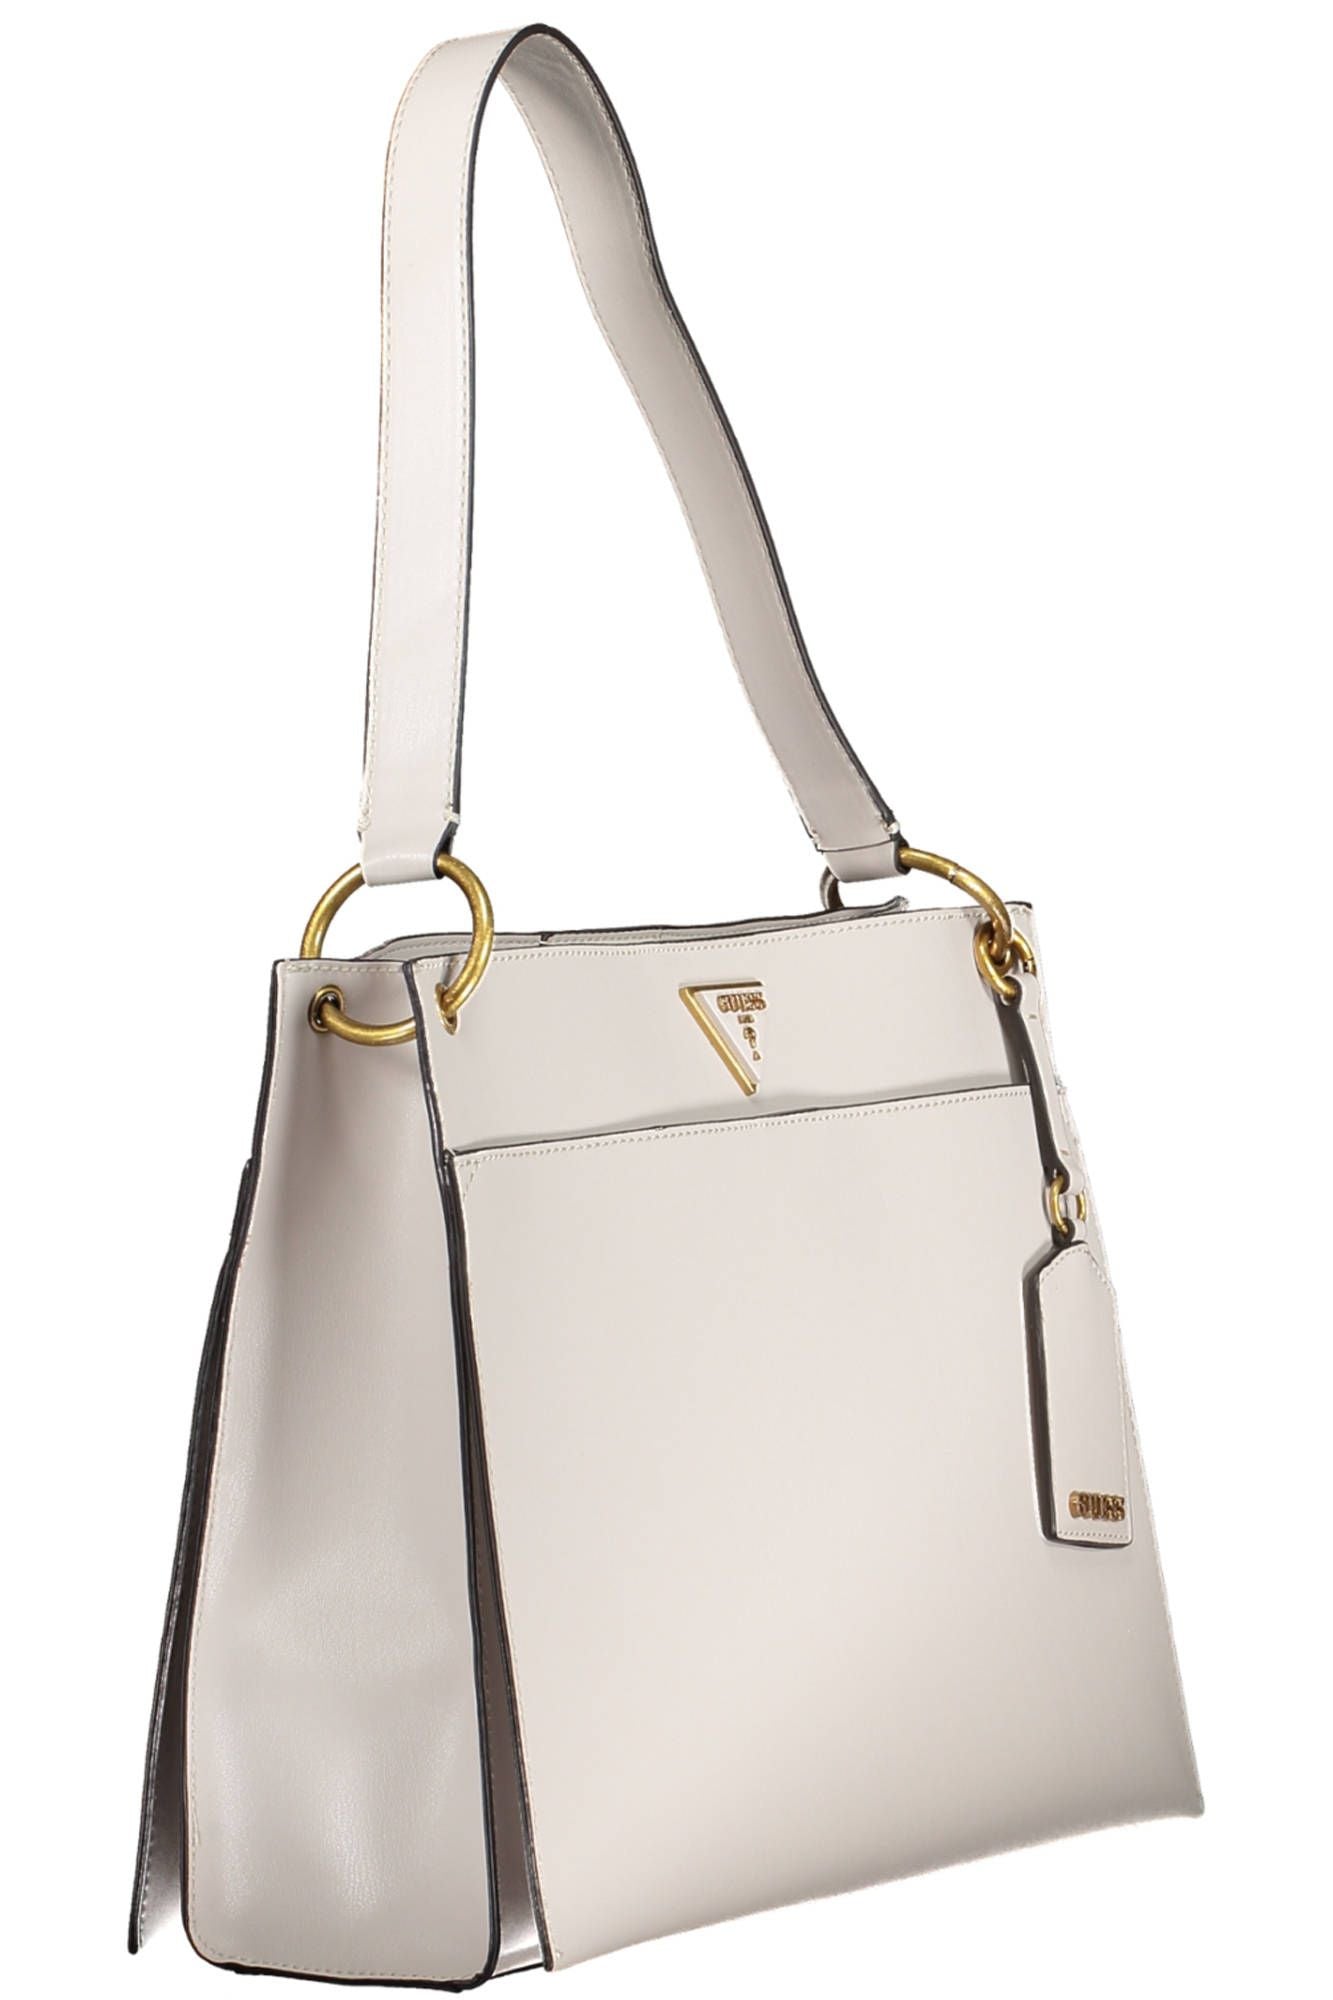 Chic Gray Shoulder Bag with Contrasting Details